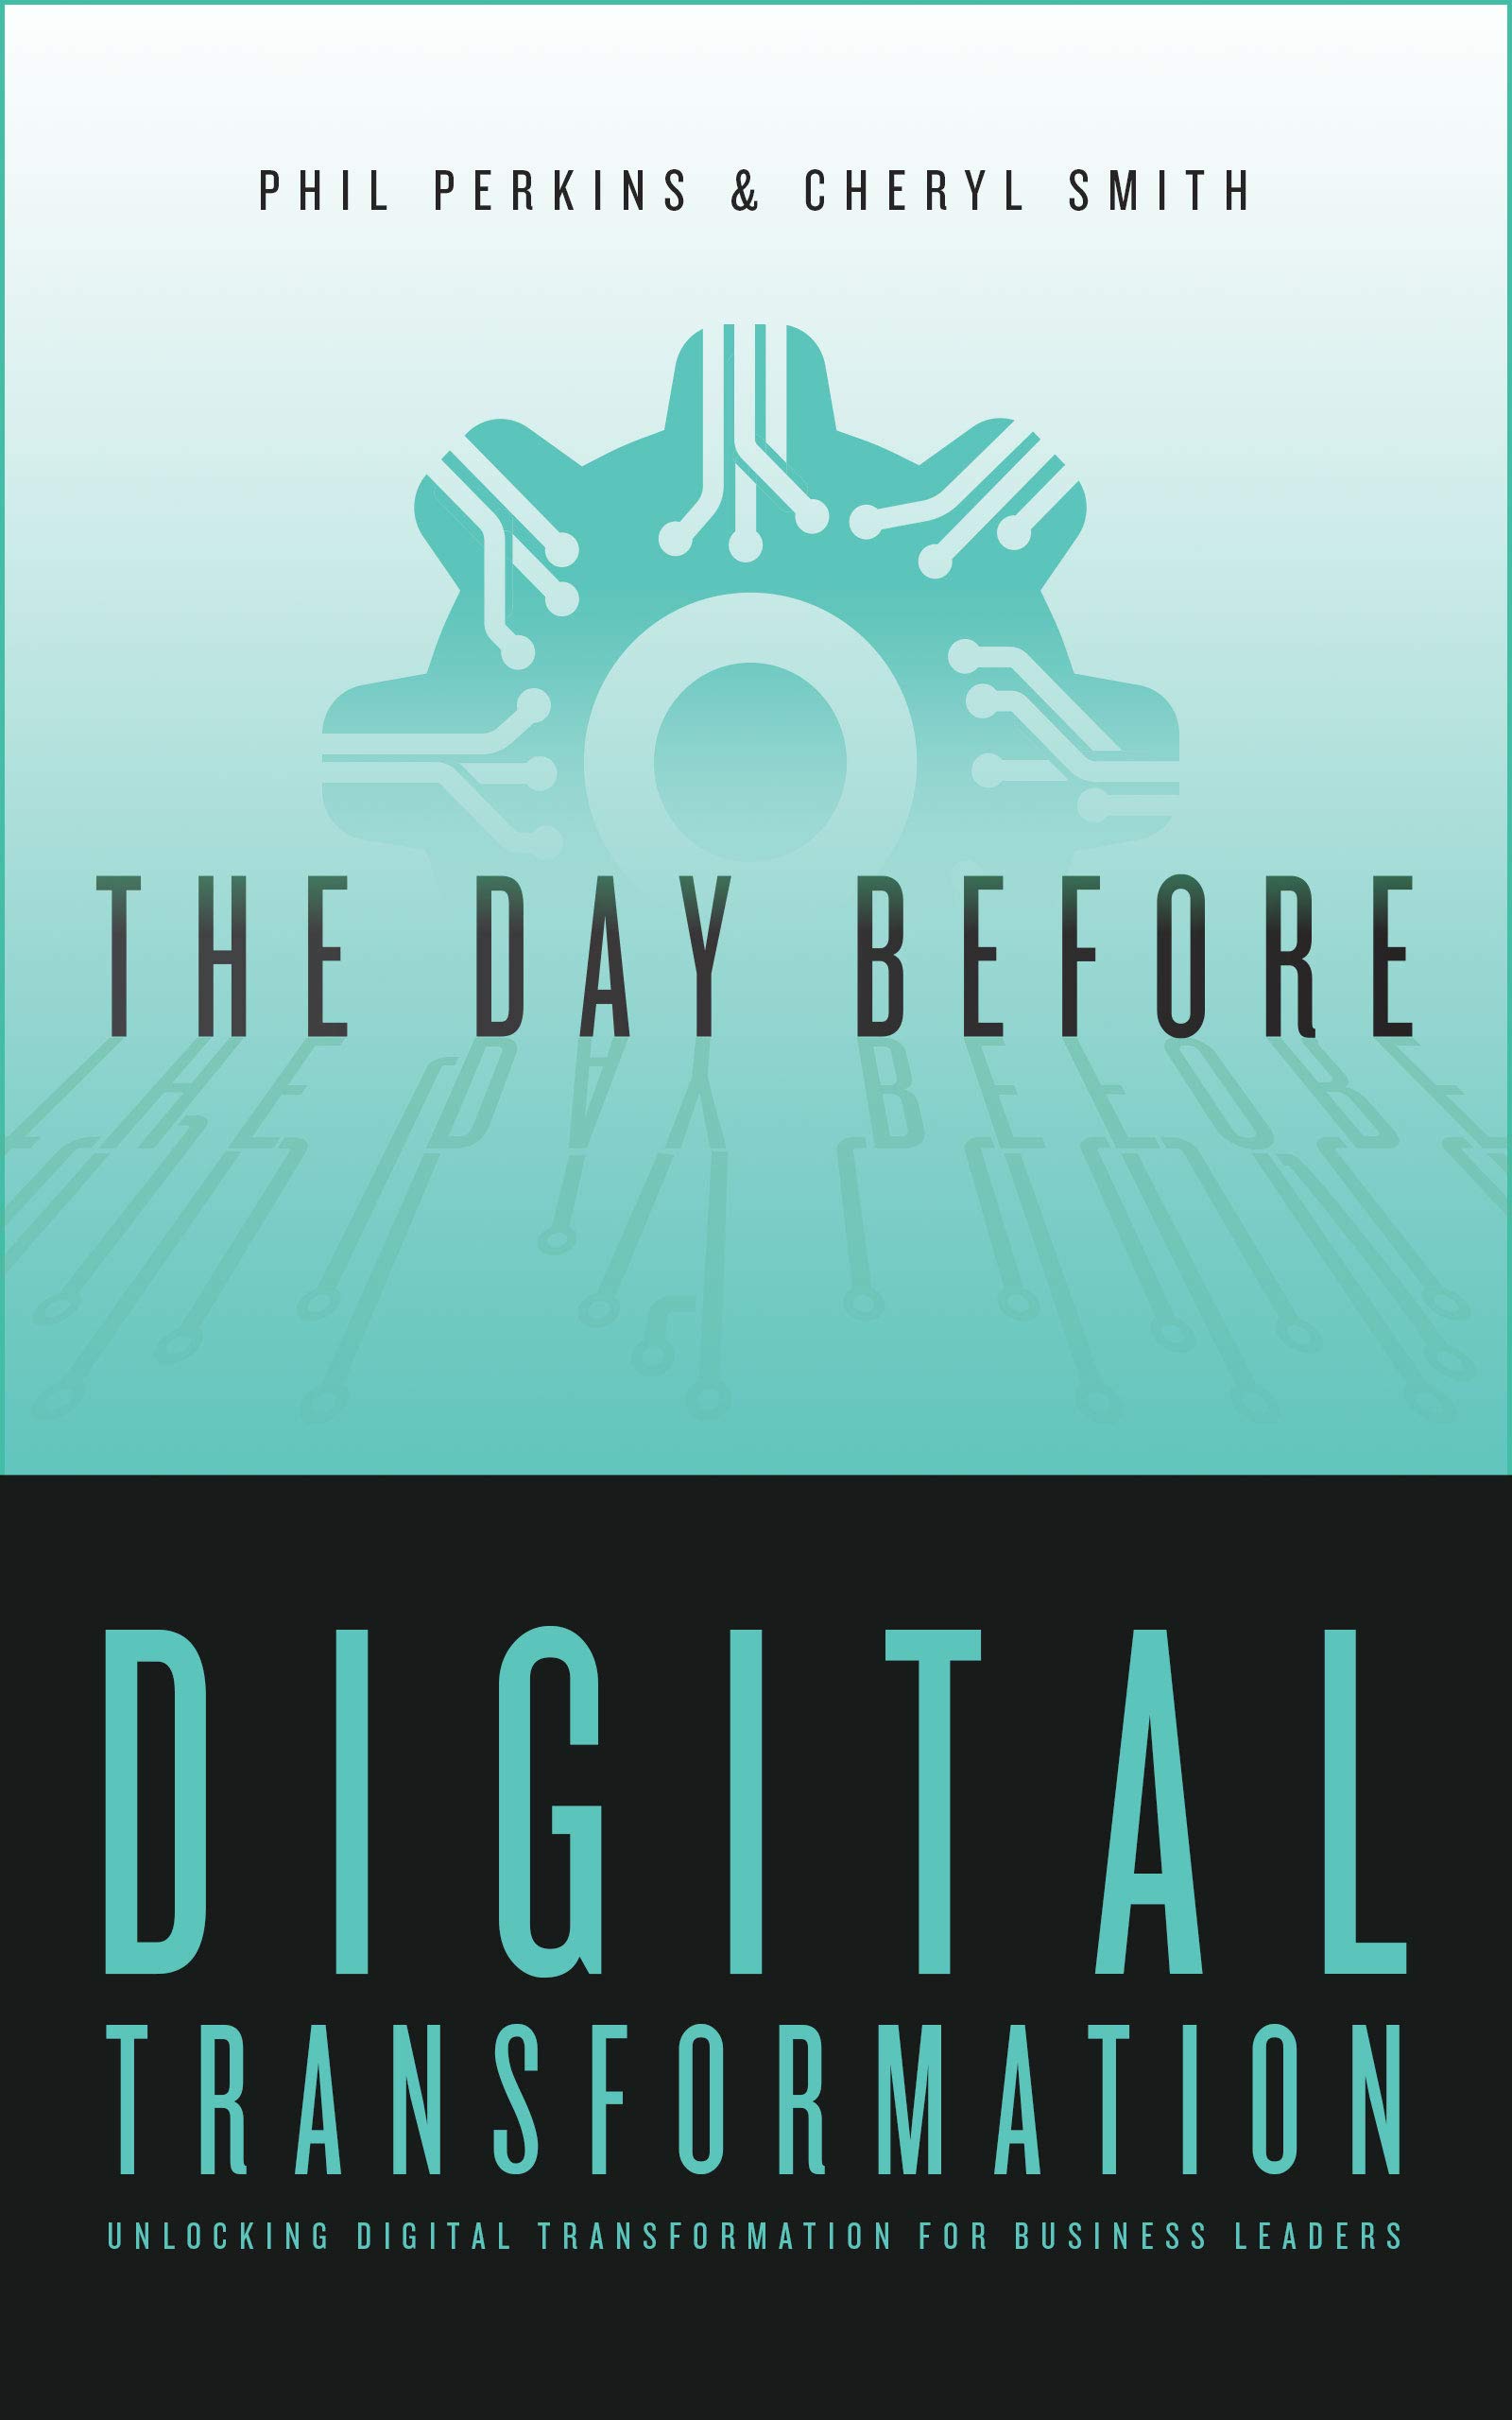 The day before digital transformation unlocking digital transformation for business leaders